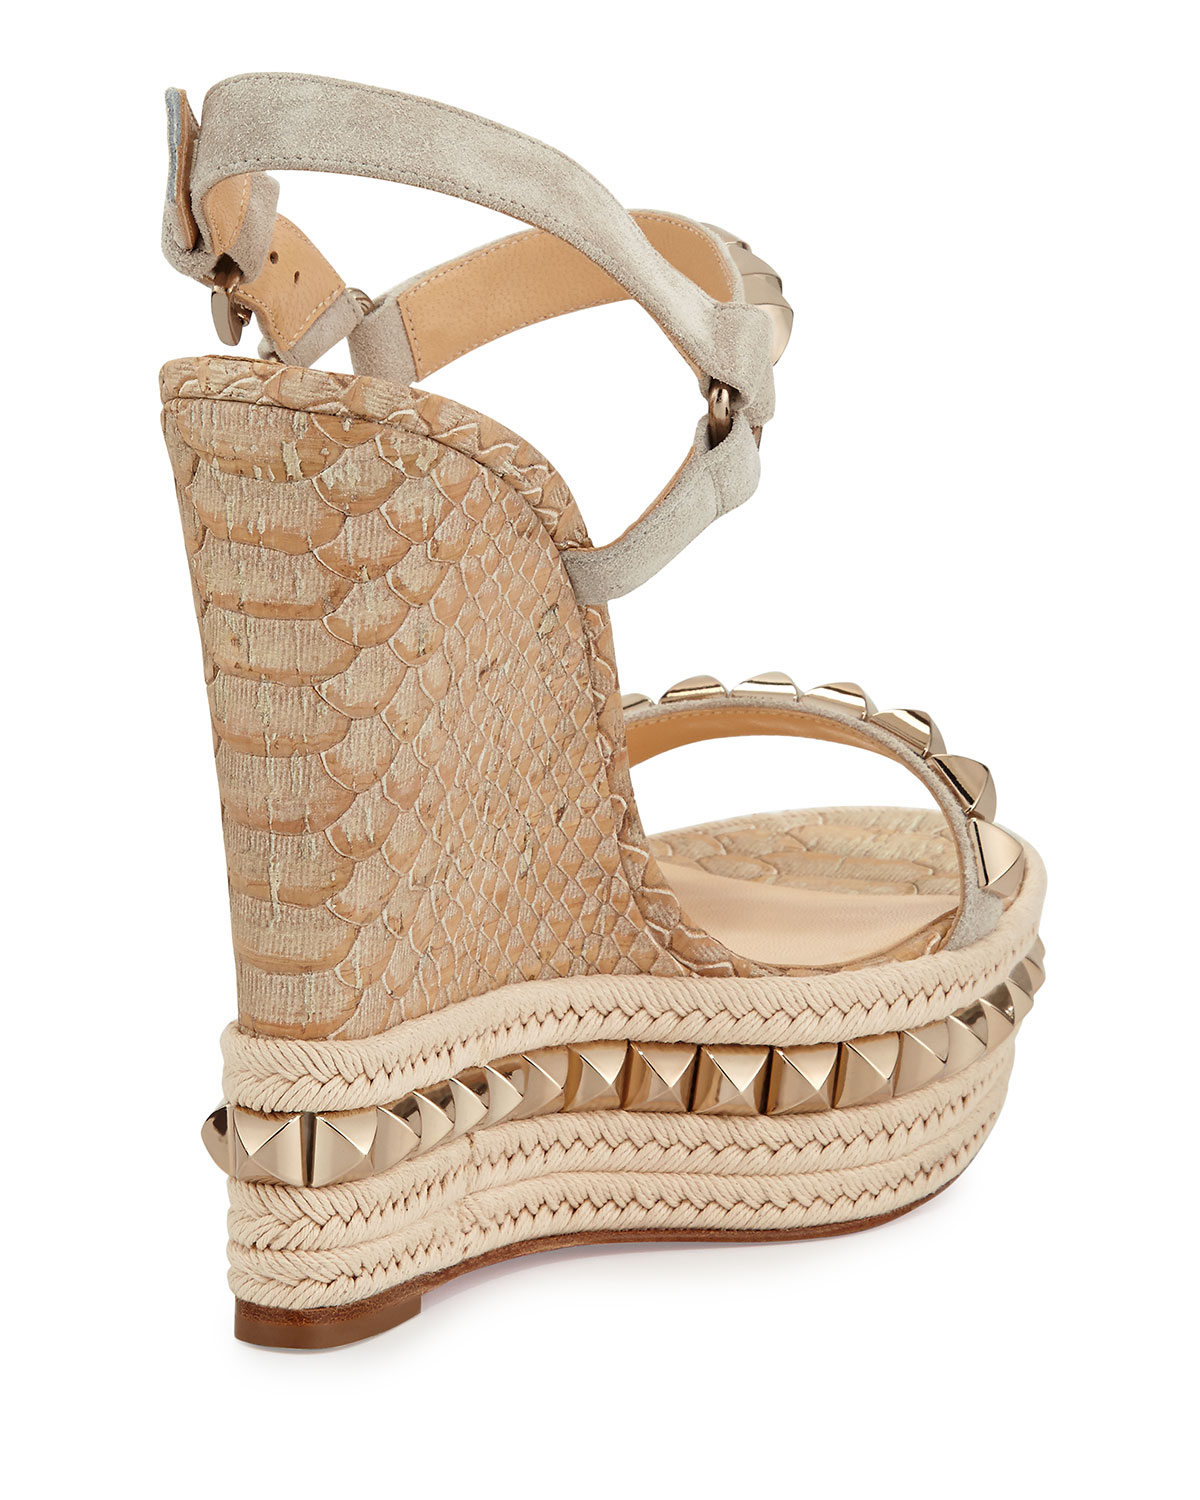 Christian louboutin Cataclou Python-Embossed Wedge Sandals in Gold ...  